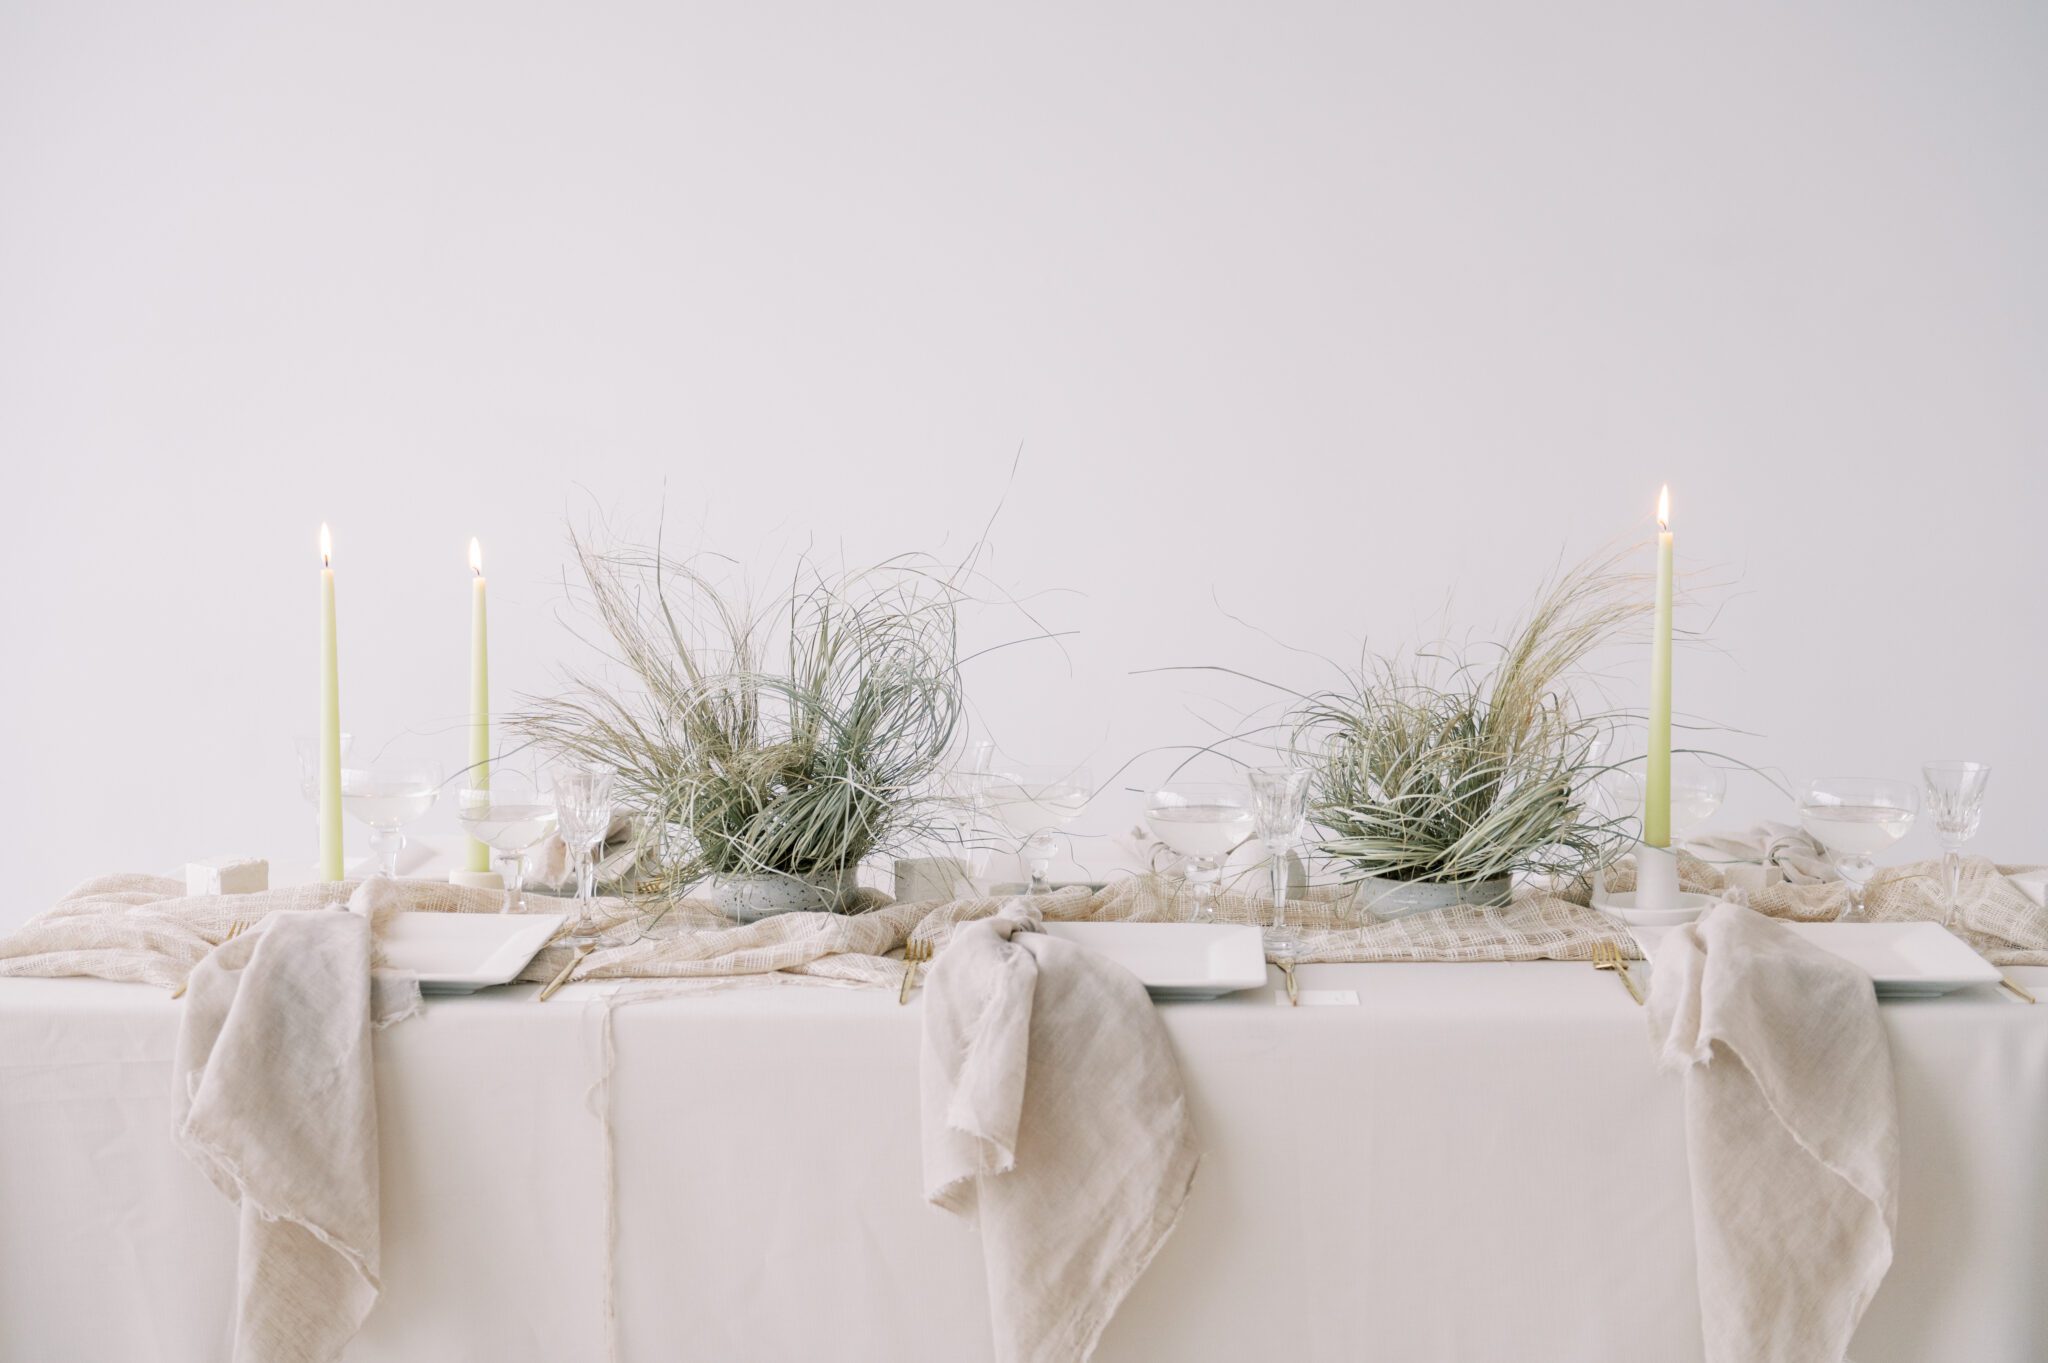 grass centrepieces by Fall for Florals featuring white and beige table scape, artful florals and nature-inspired textures for contemporary weddings, neutral wedding ideas with white and beige palette